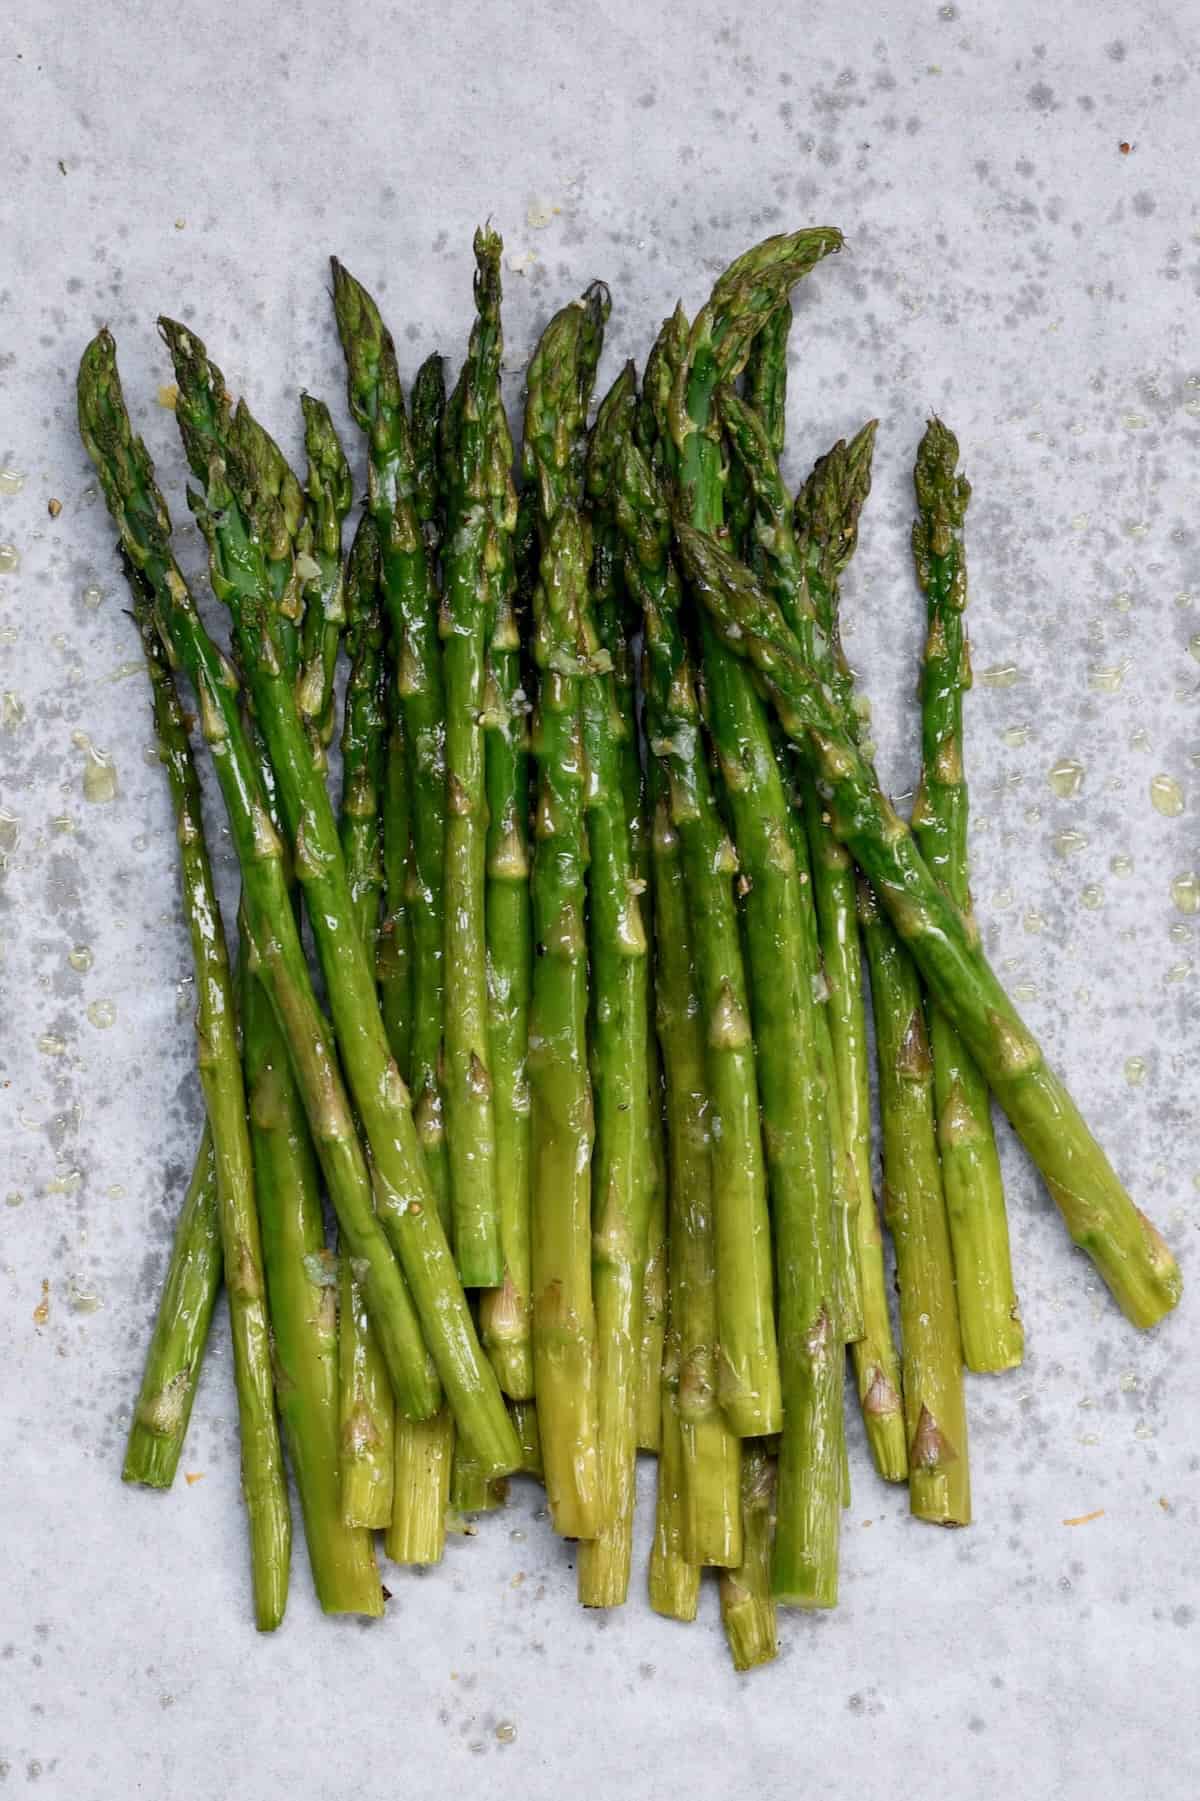 Oven-roasted asparagus on a baking tray